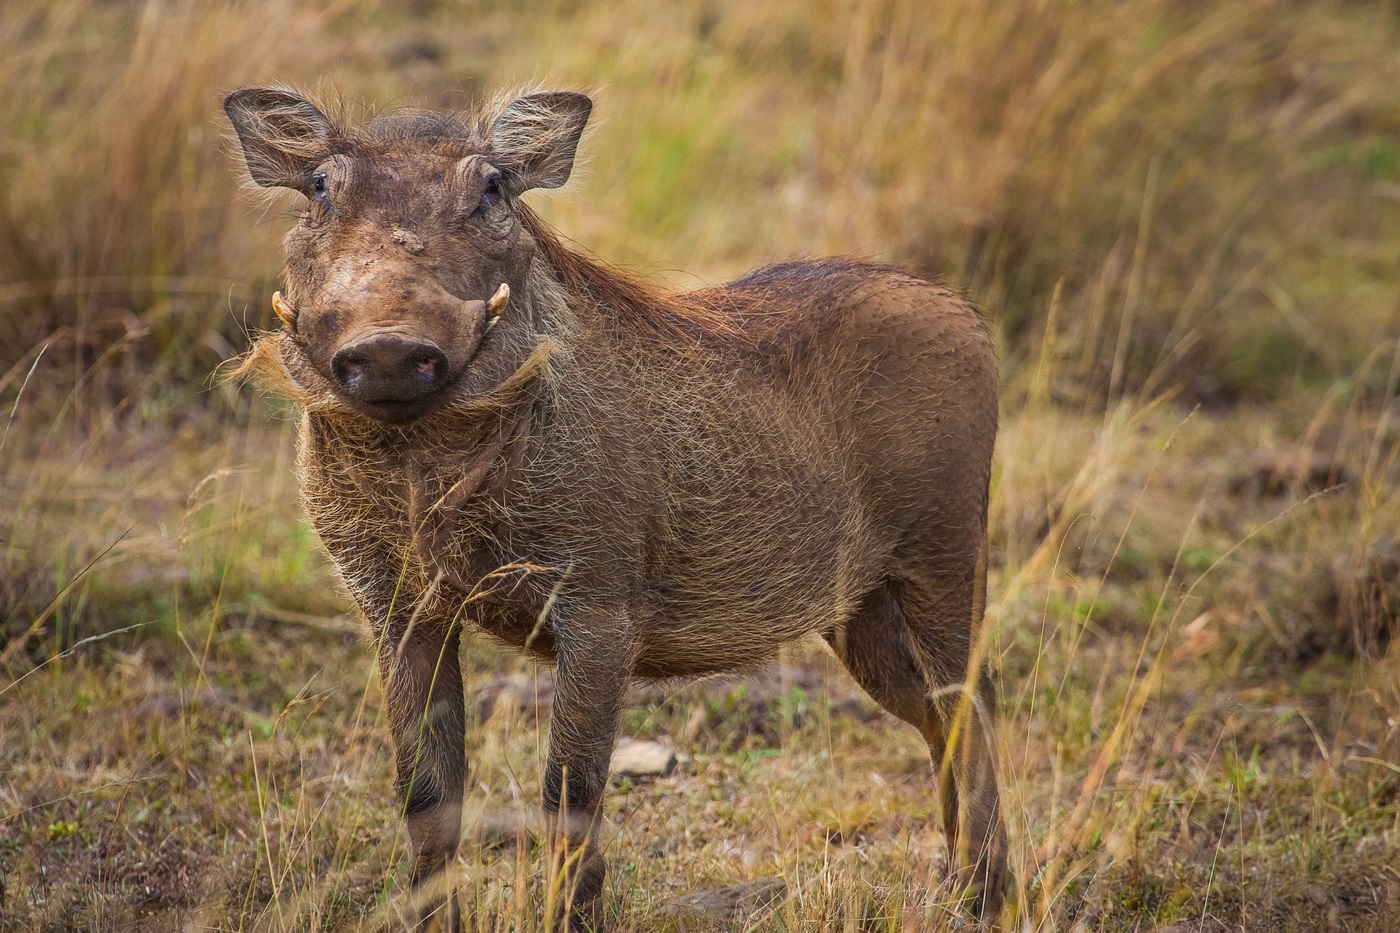 A warthog rushed out onto the road at the Masai Mara National Park in Ke...